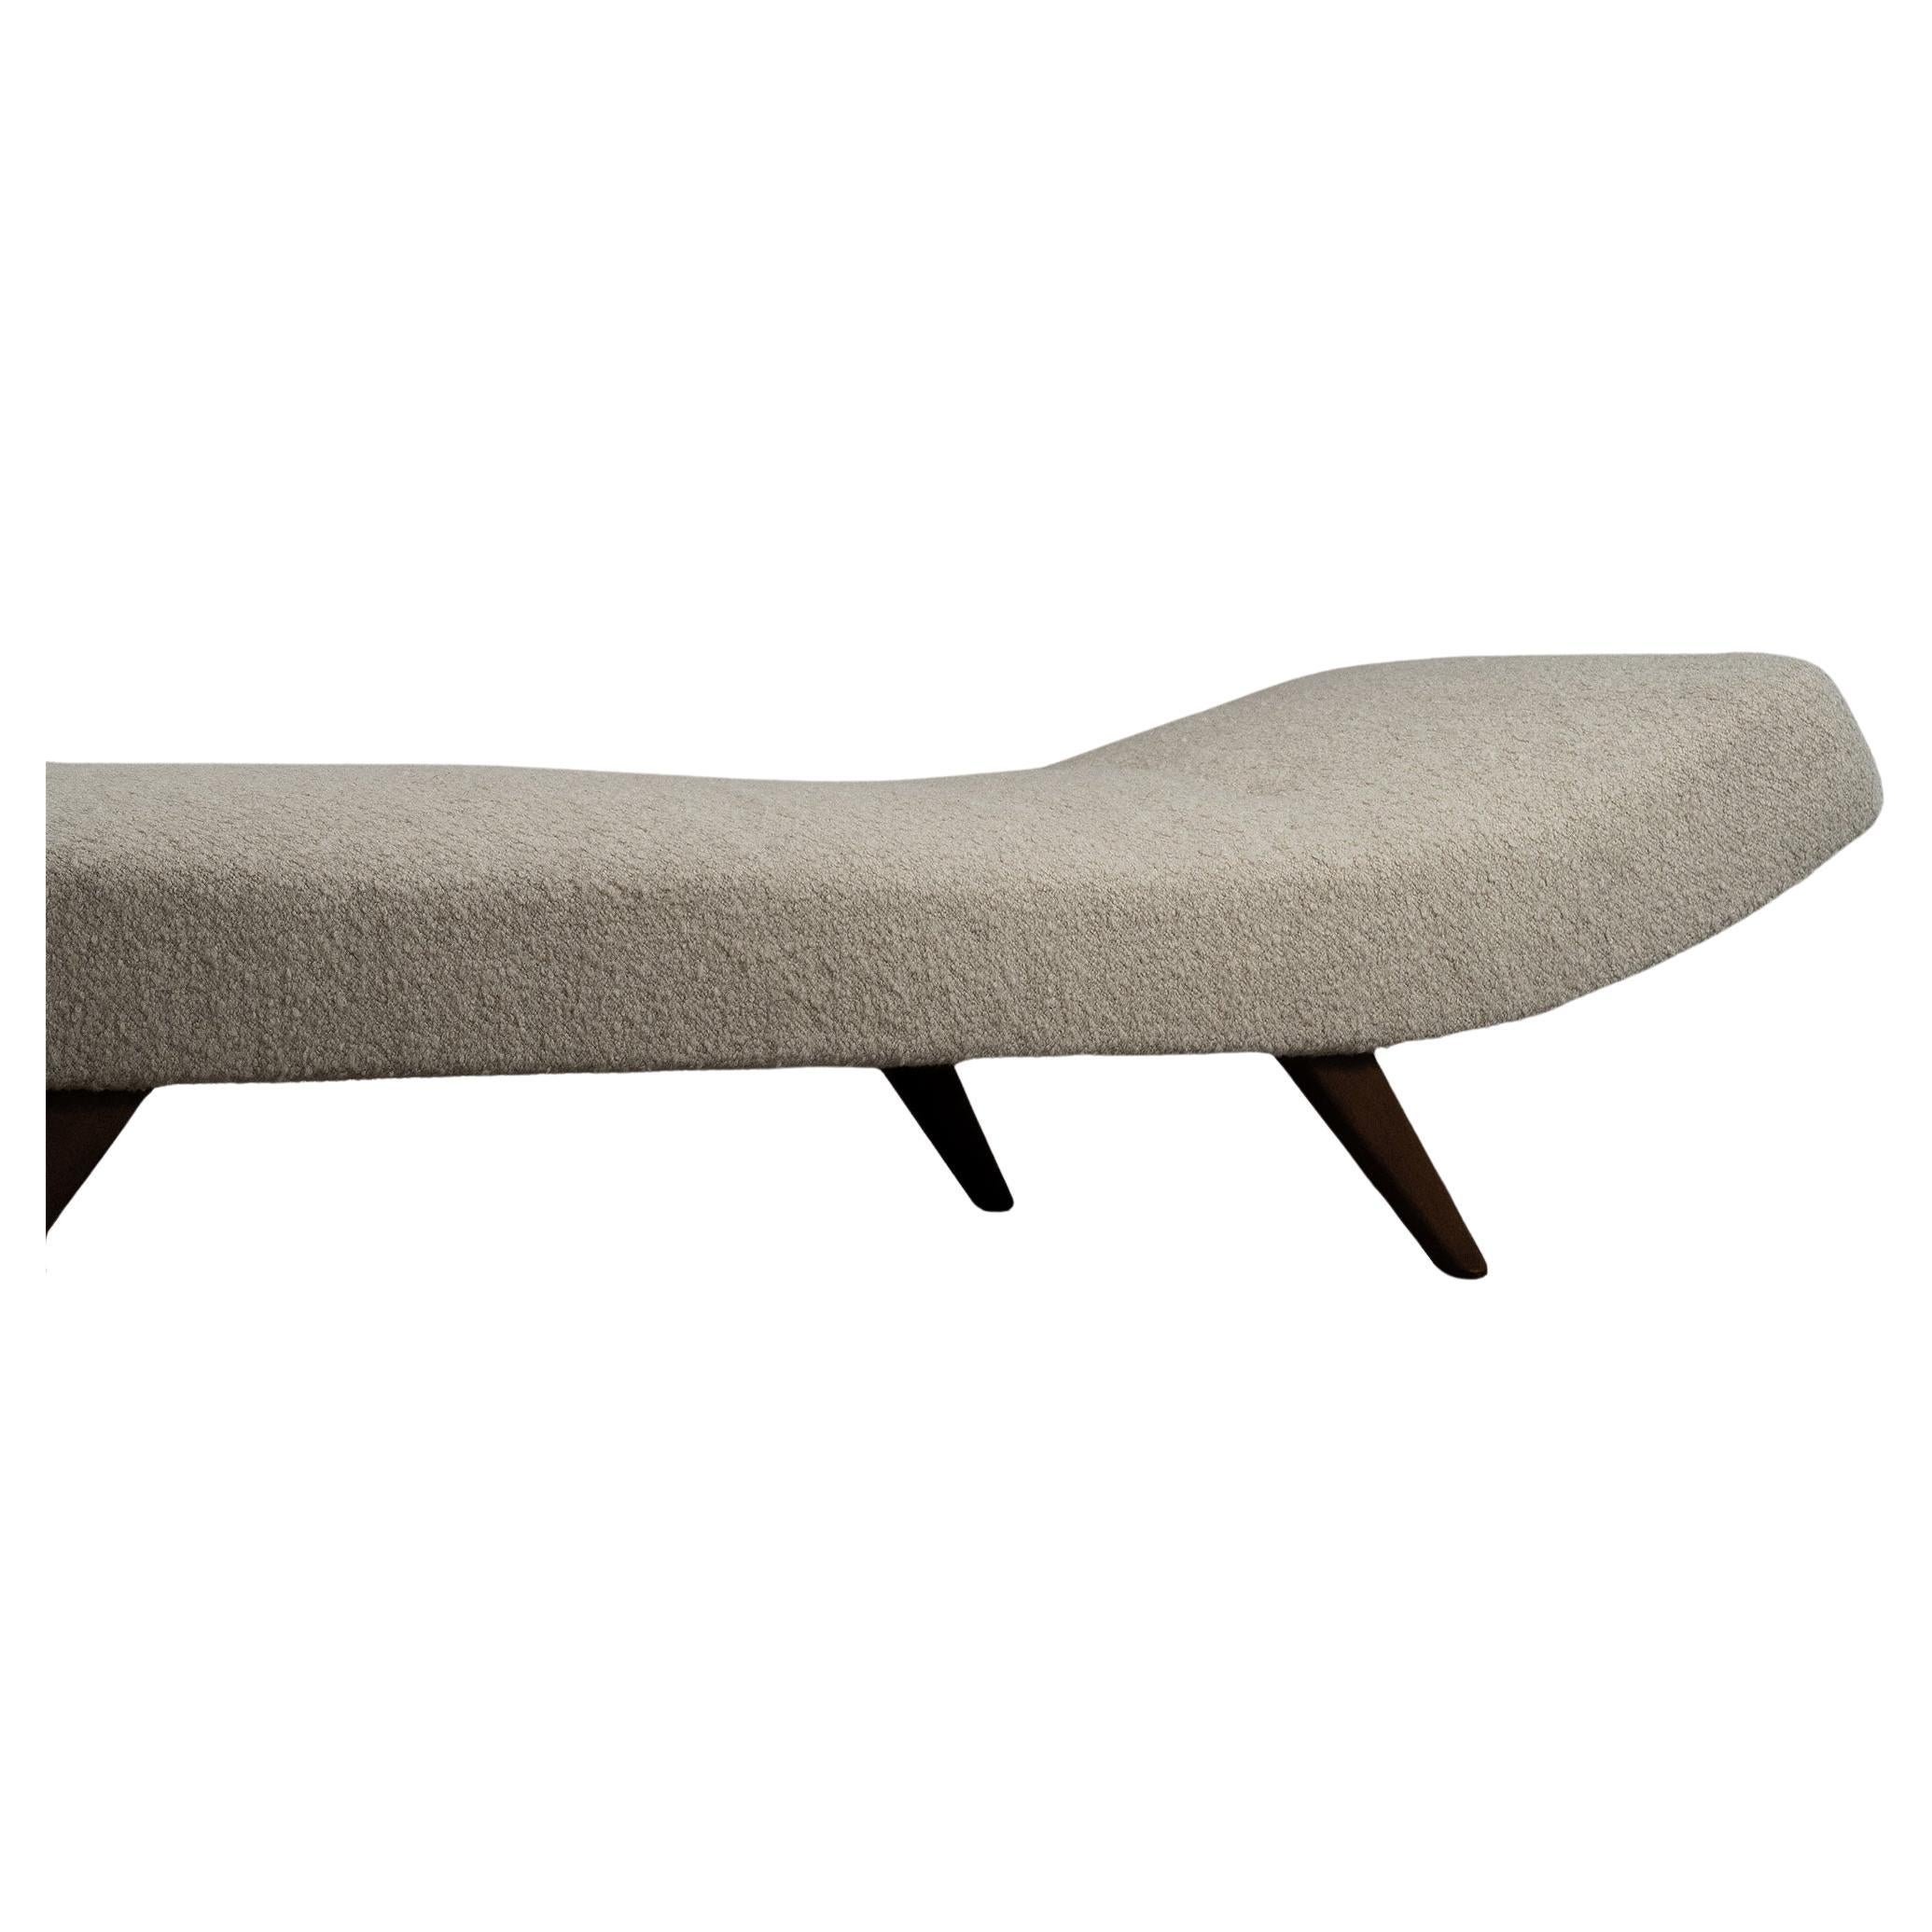 Modern minimalistic and sleek daybed, inspired by classic Danish furniture design. The daybed features a single long mattress with button tufting to provide more depth. The dark wooden legs have been newly oiled and the mattress has been